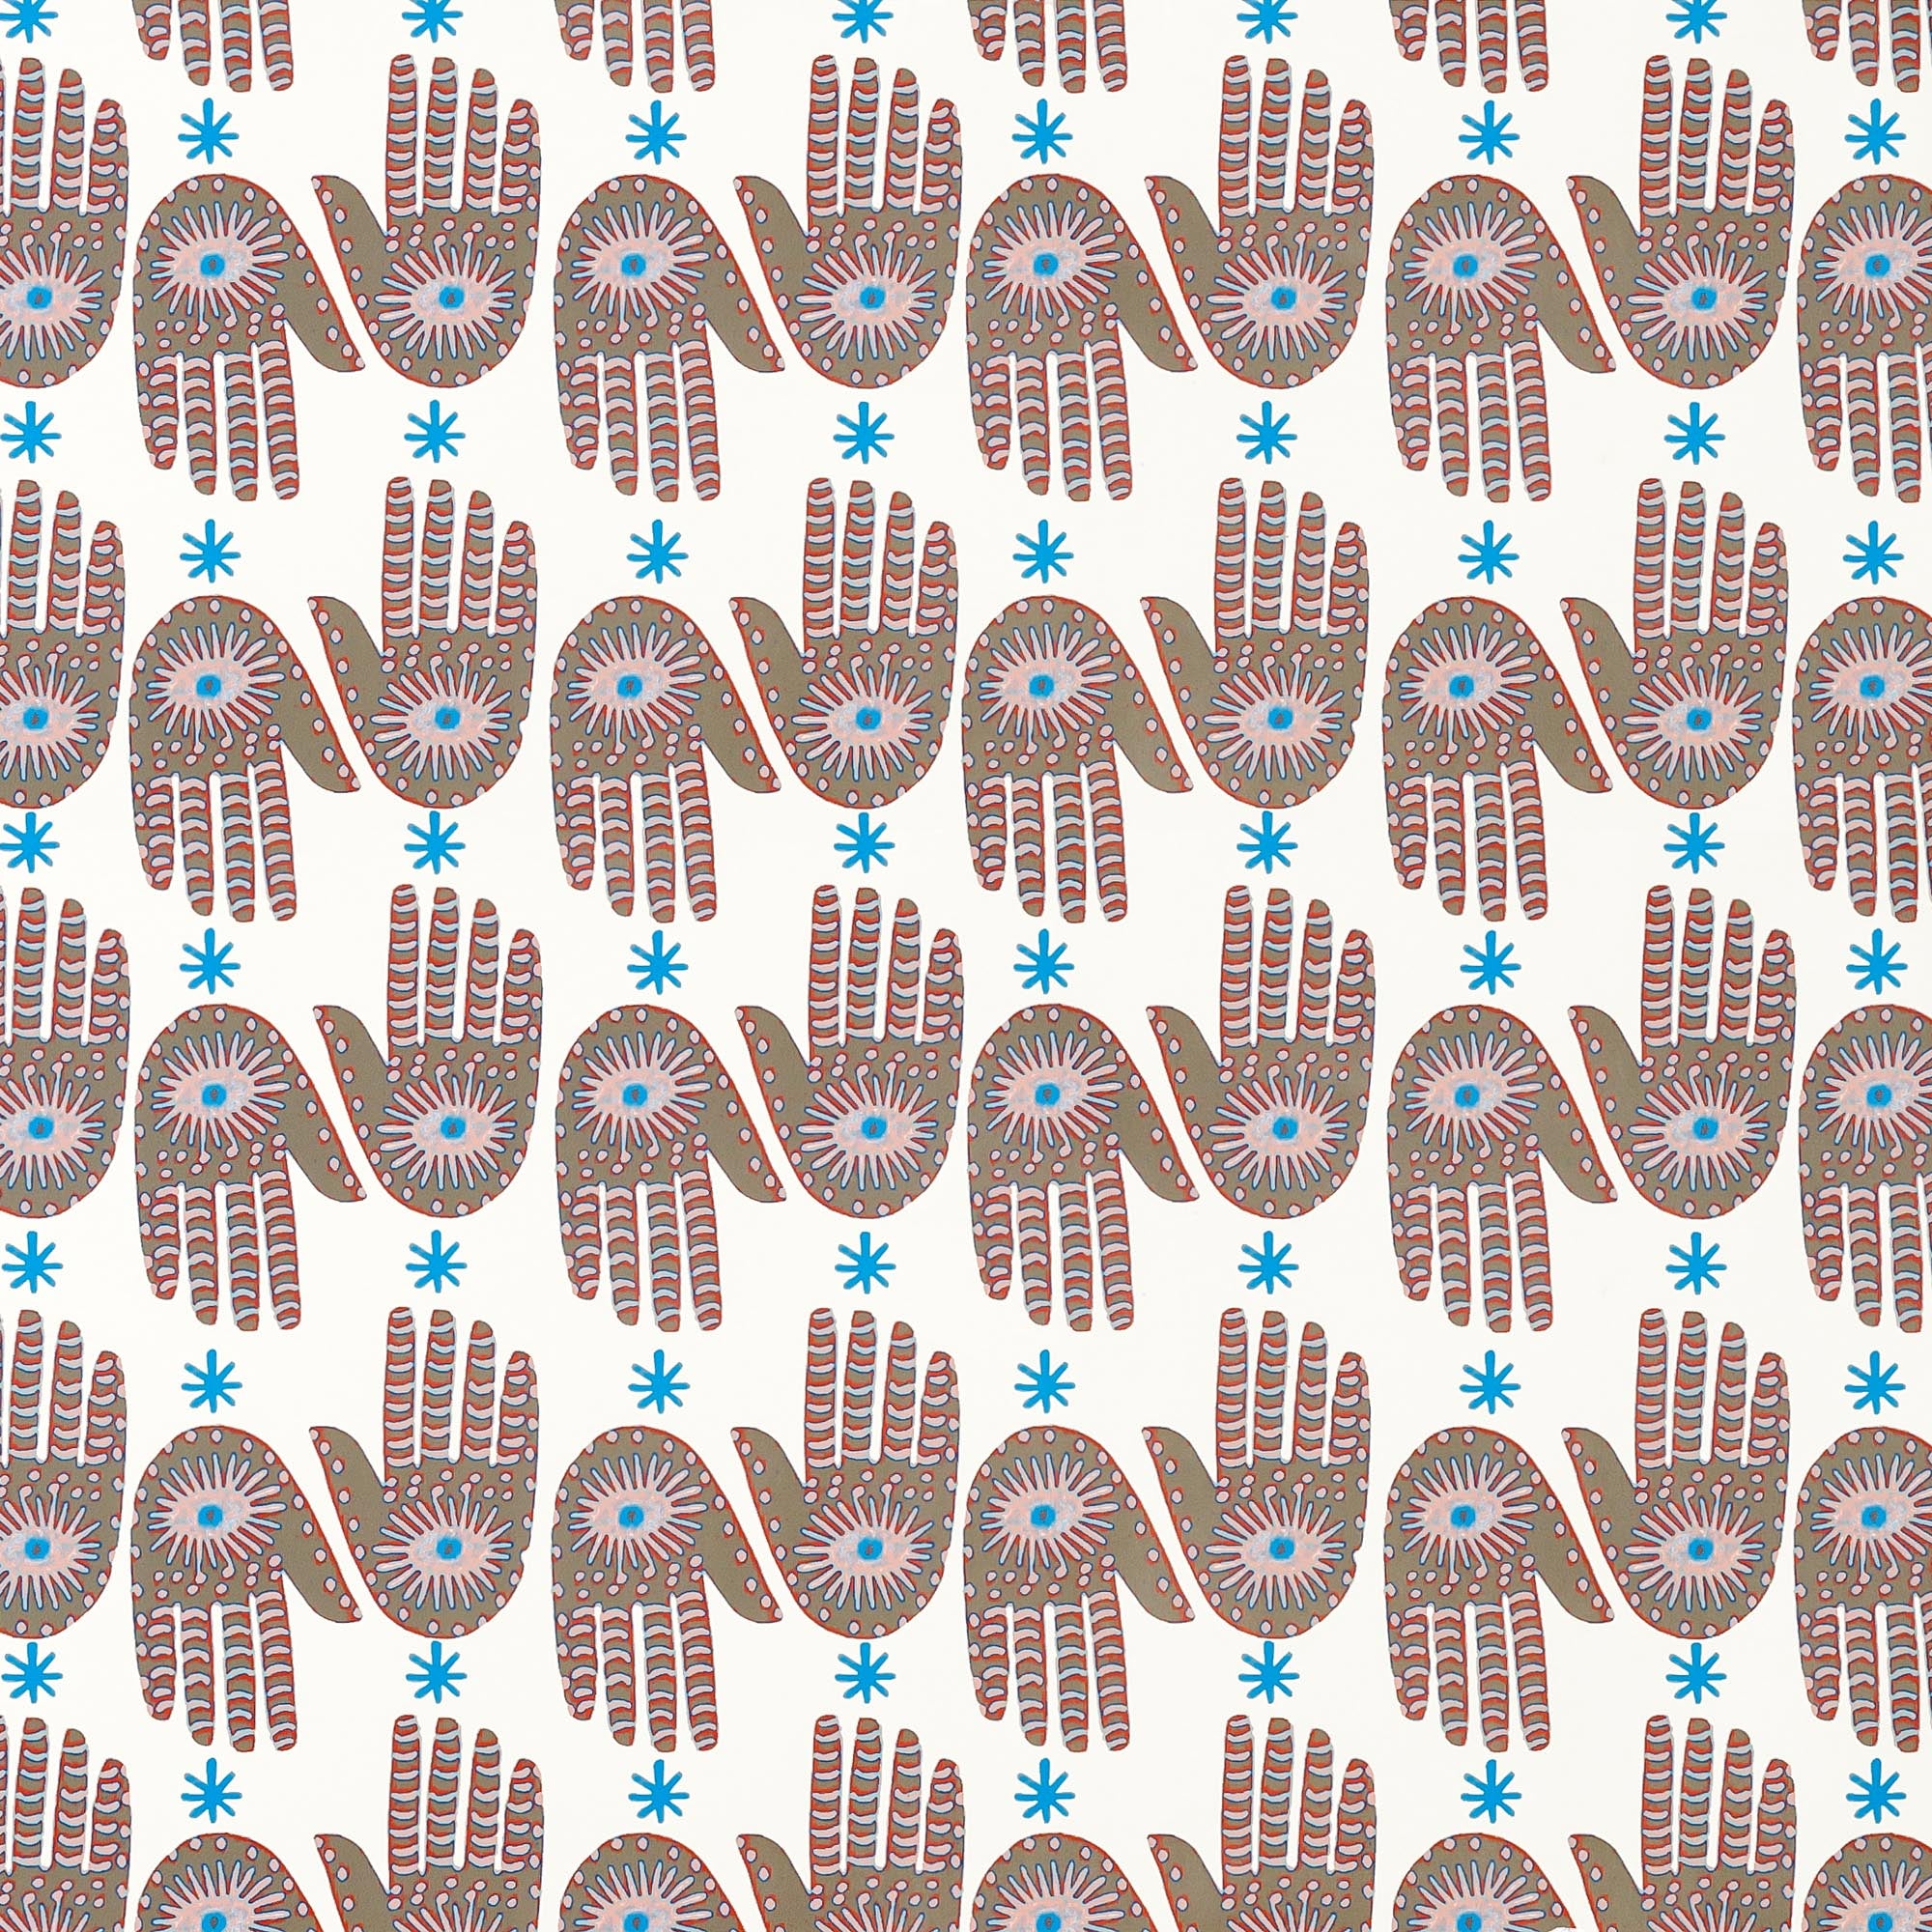 Detail of wallpaper in a playful hamsa hand print in brown, pink and blue on a white field.